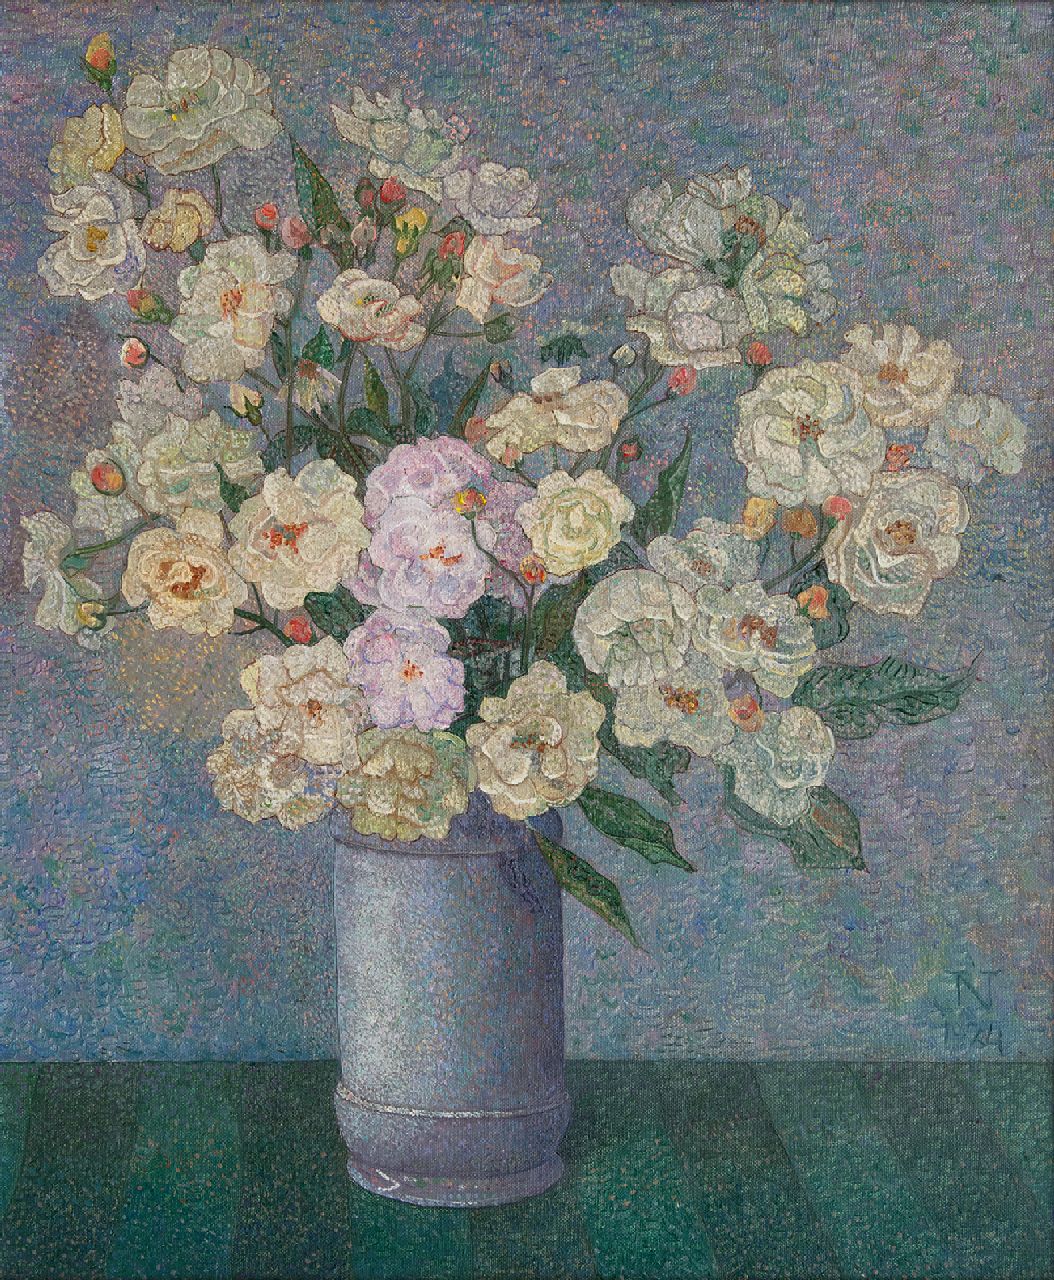 Nieweg J.  | Jakob Nieweg, A flower still life, oil on canvas 60.5 x 50.6 cm, signed l.r. with Monogram and dated 1924